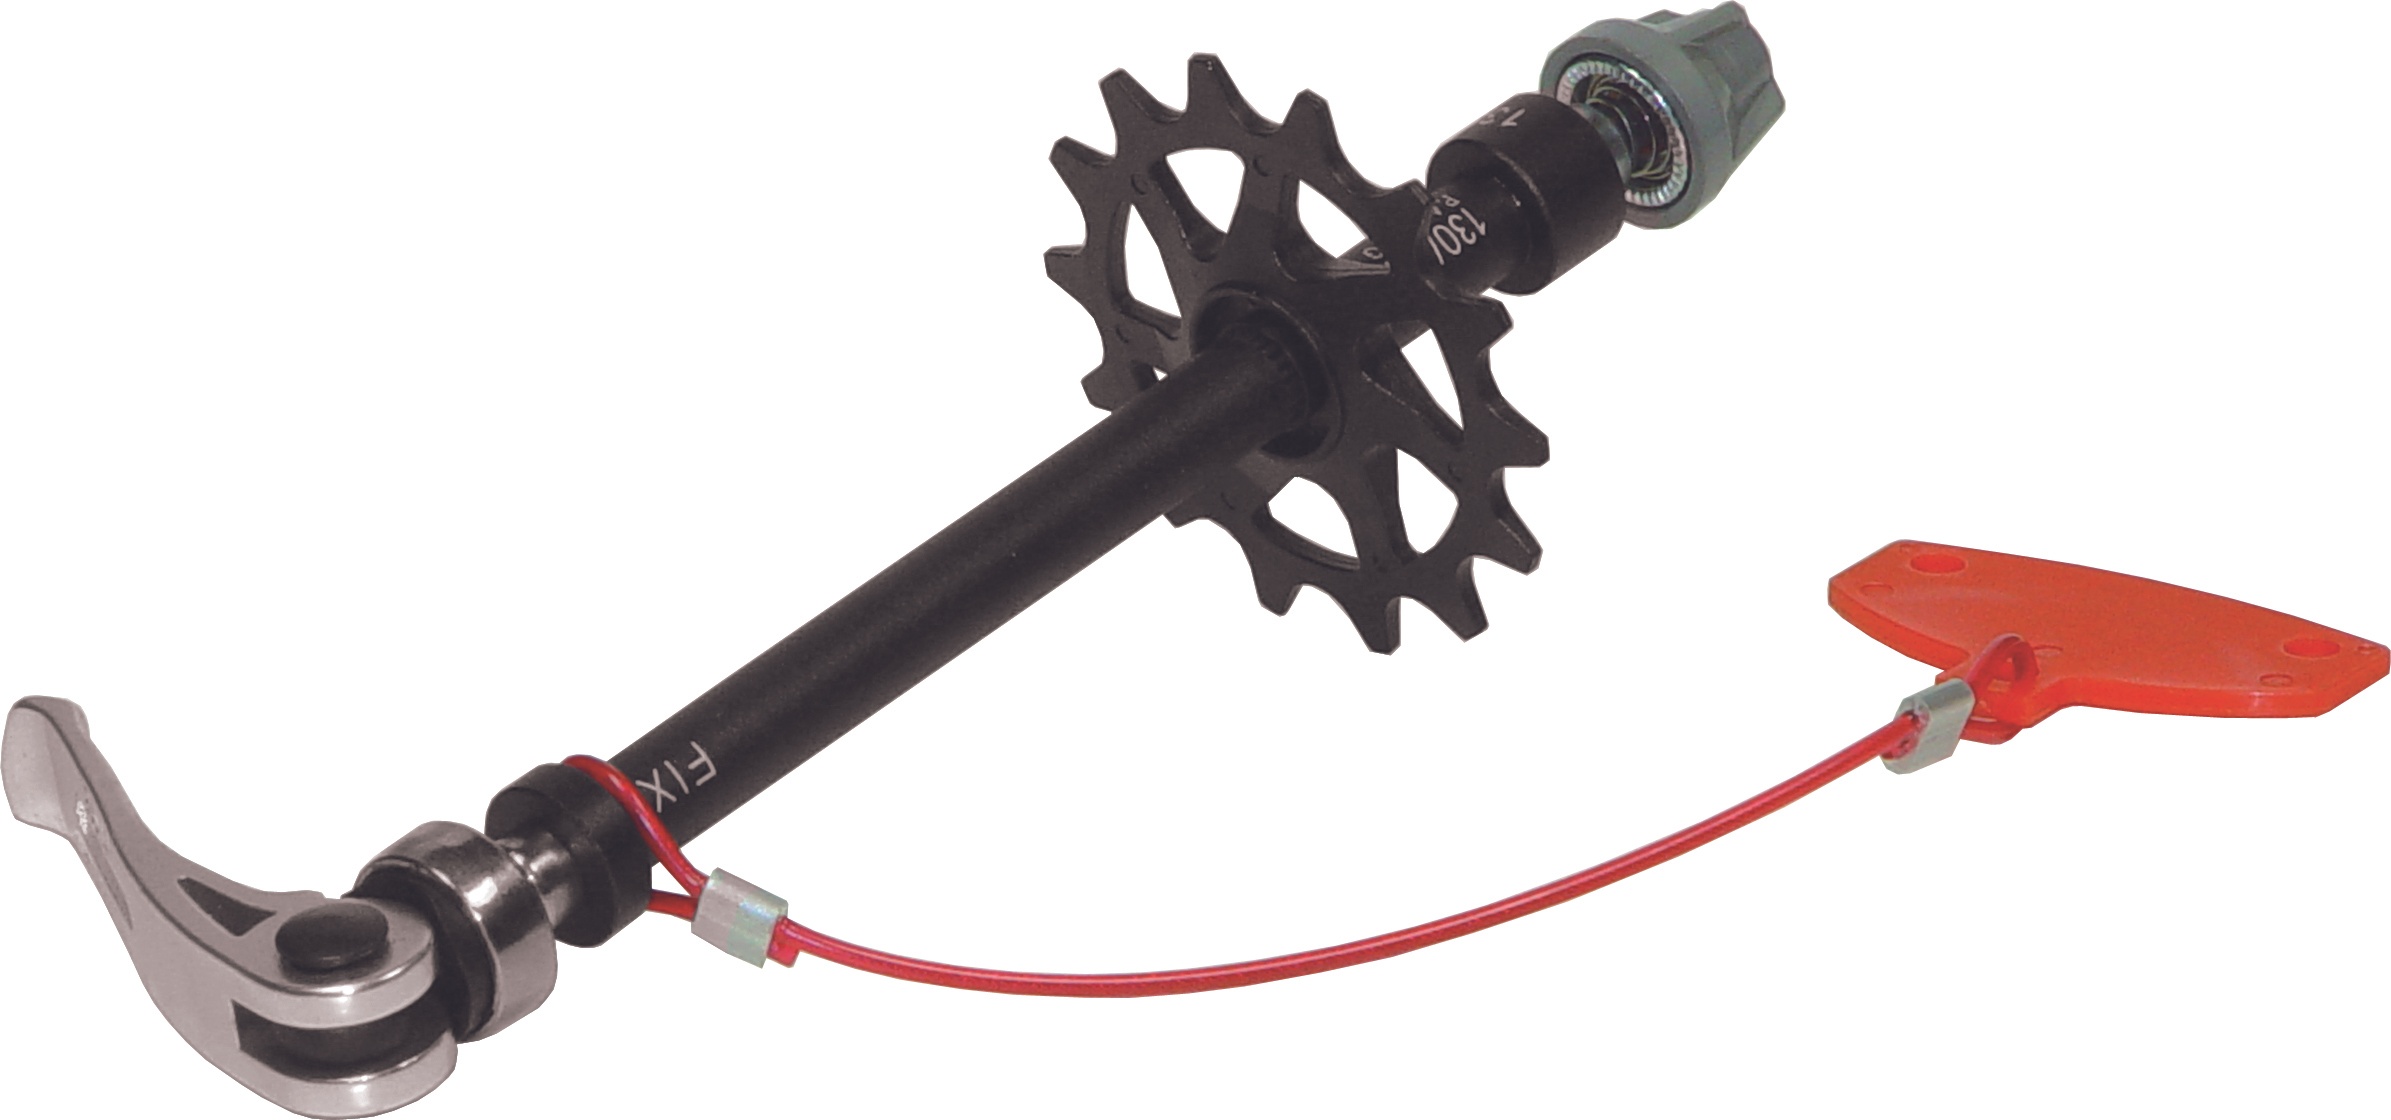 Chain tensioner rear wheel | for bike transport or cleaning